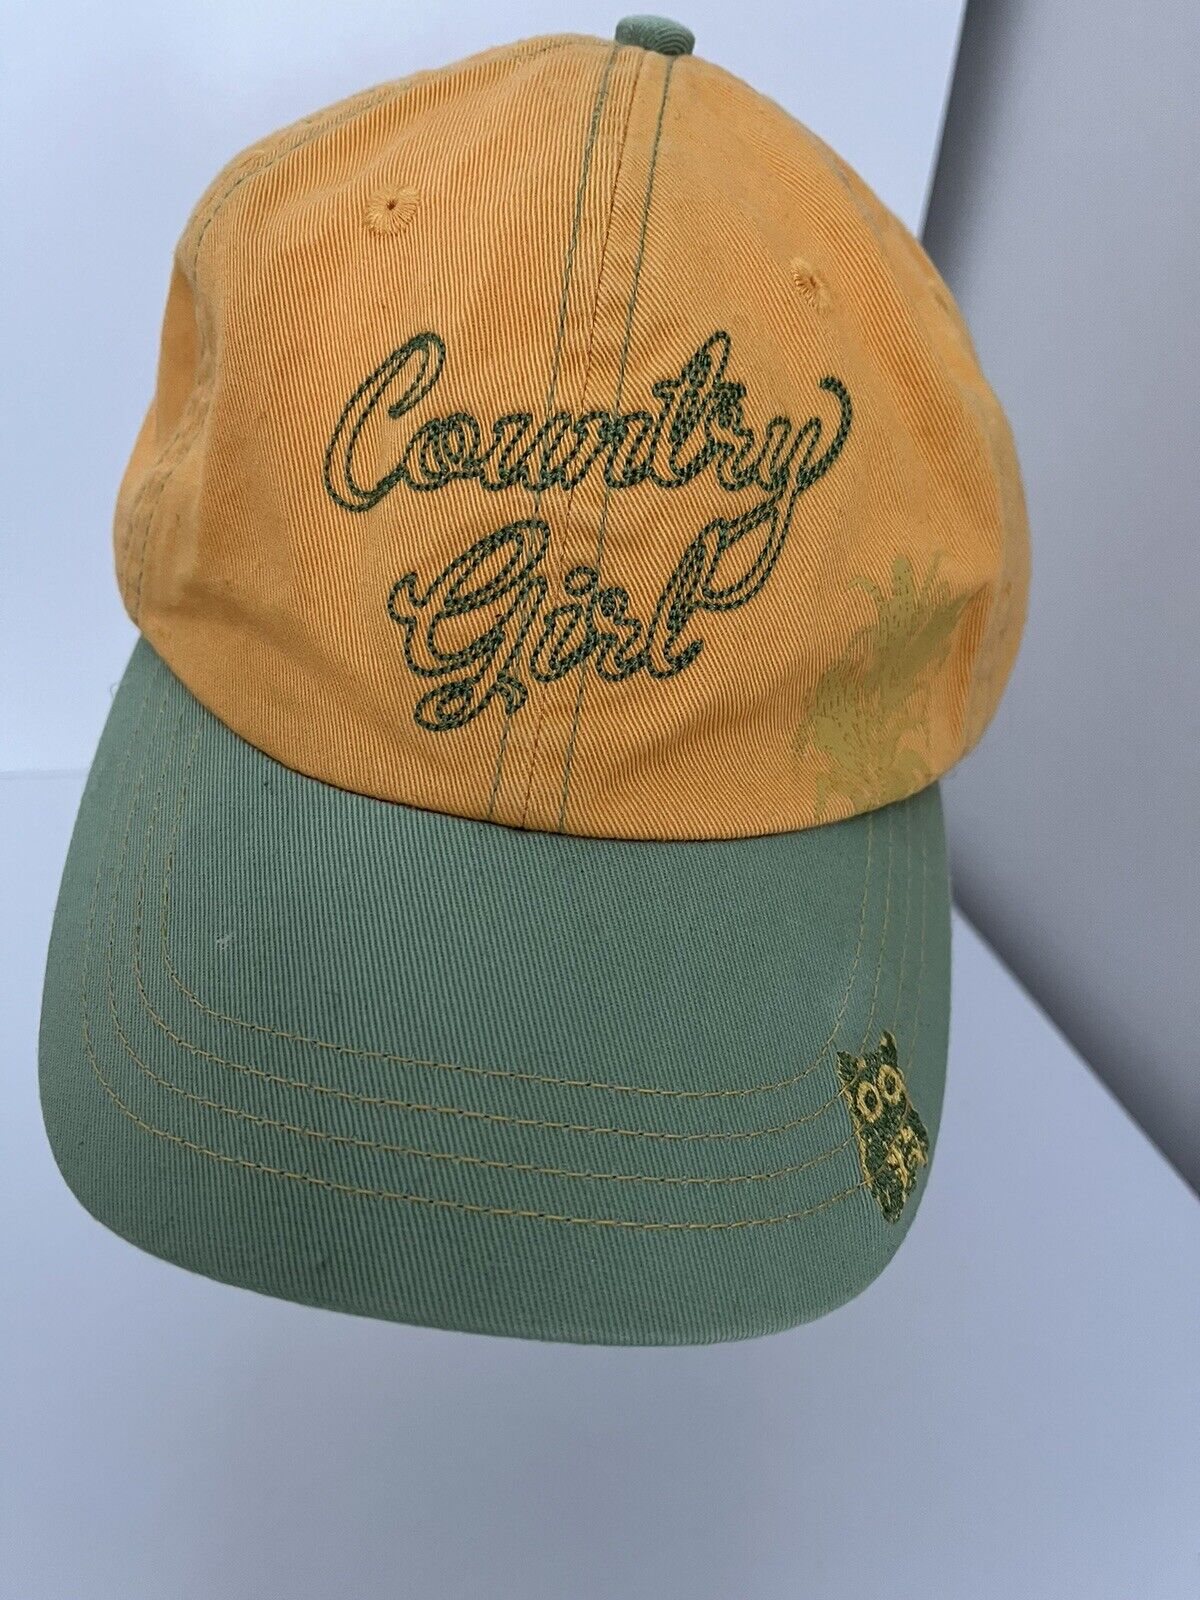 Country Girl Hooters Cap Official Licensed Product Adjustable Cap Golden Yellow